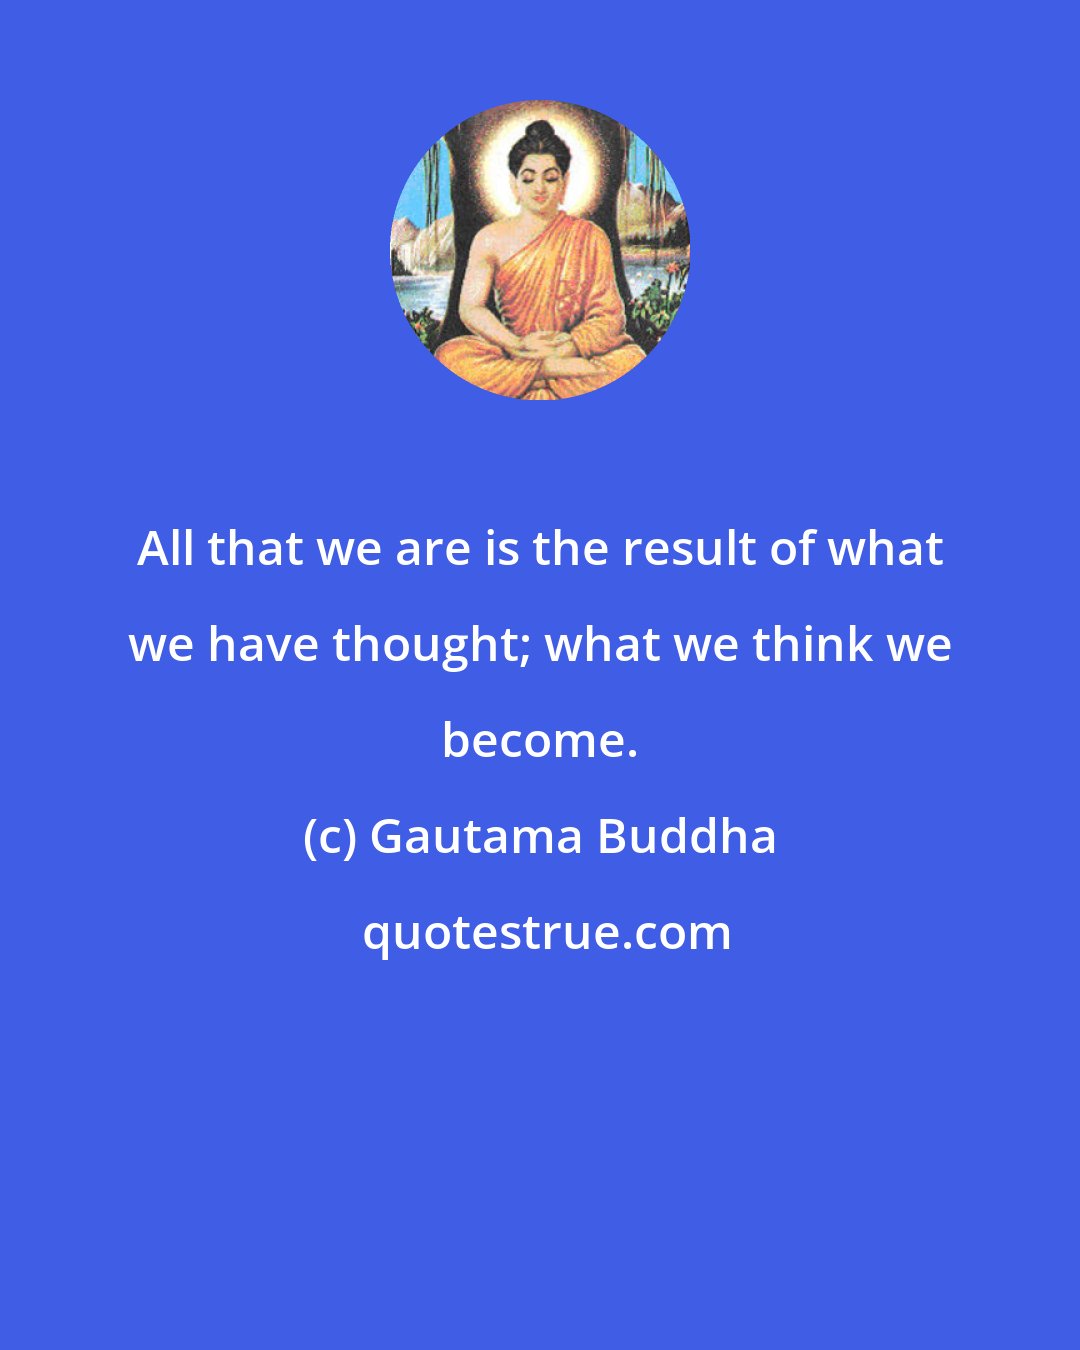 Gautama Buddha: All that we are is the result of what we have thought; what we think we become.